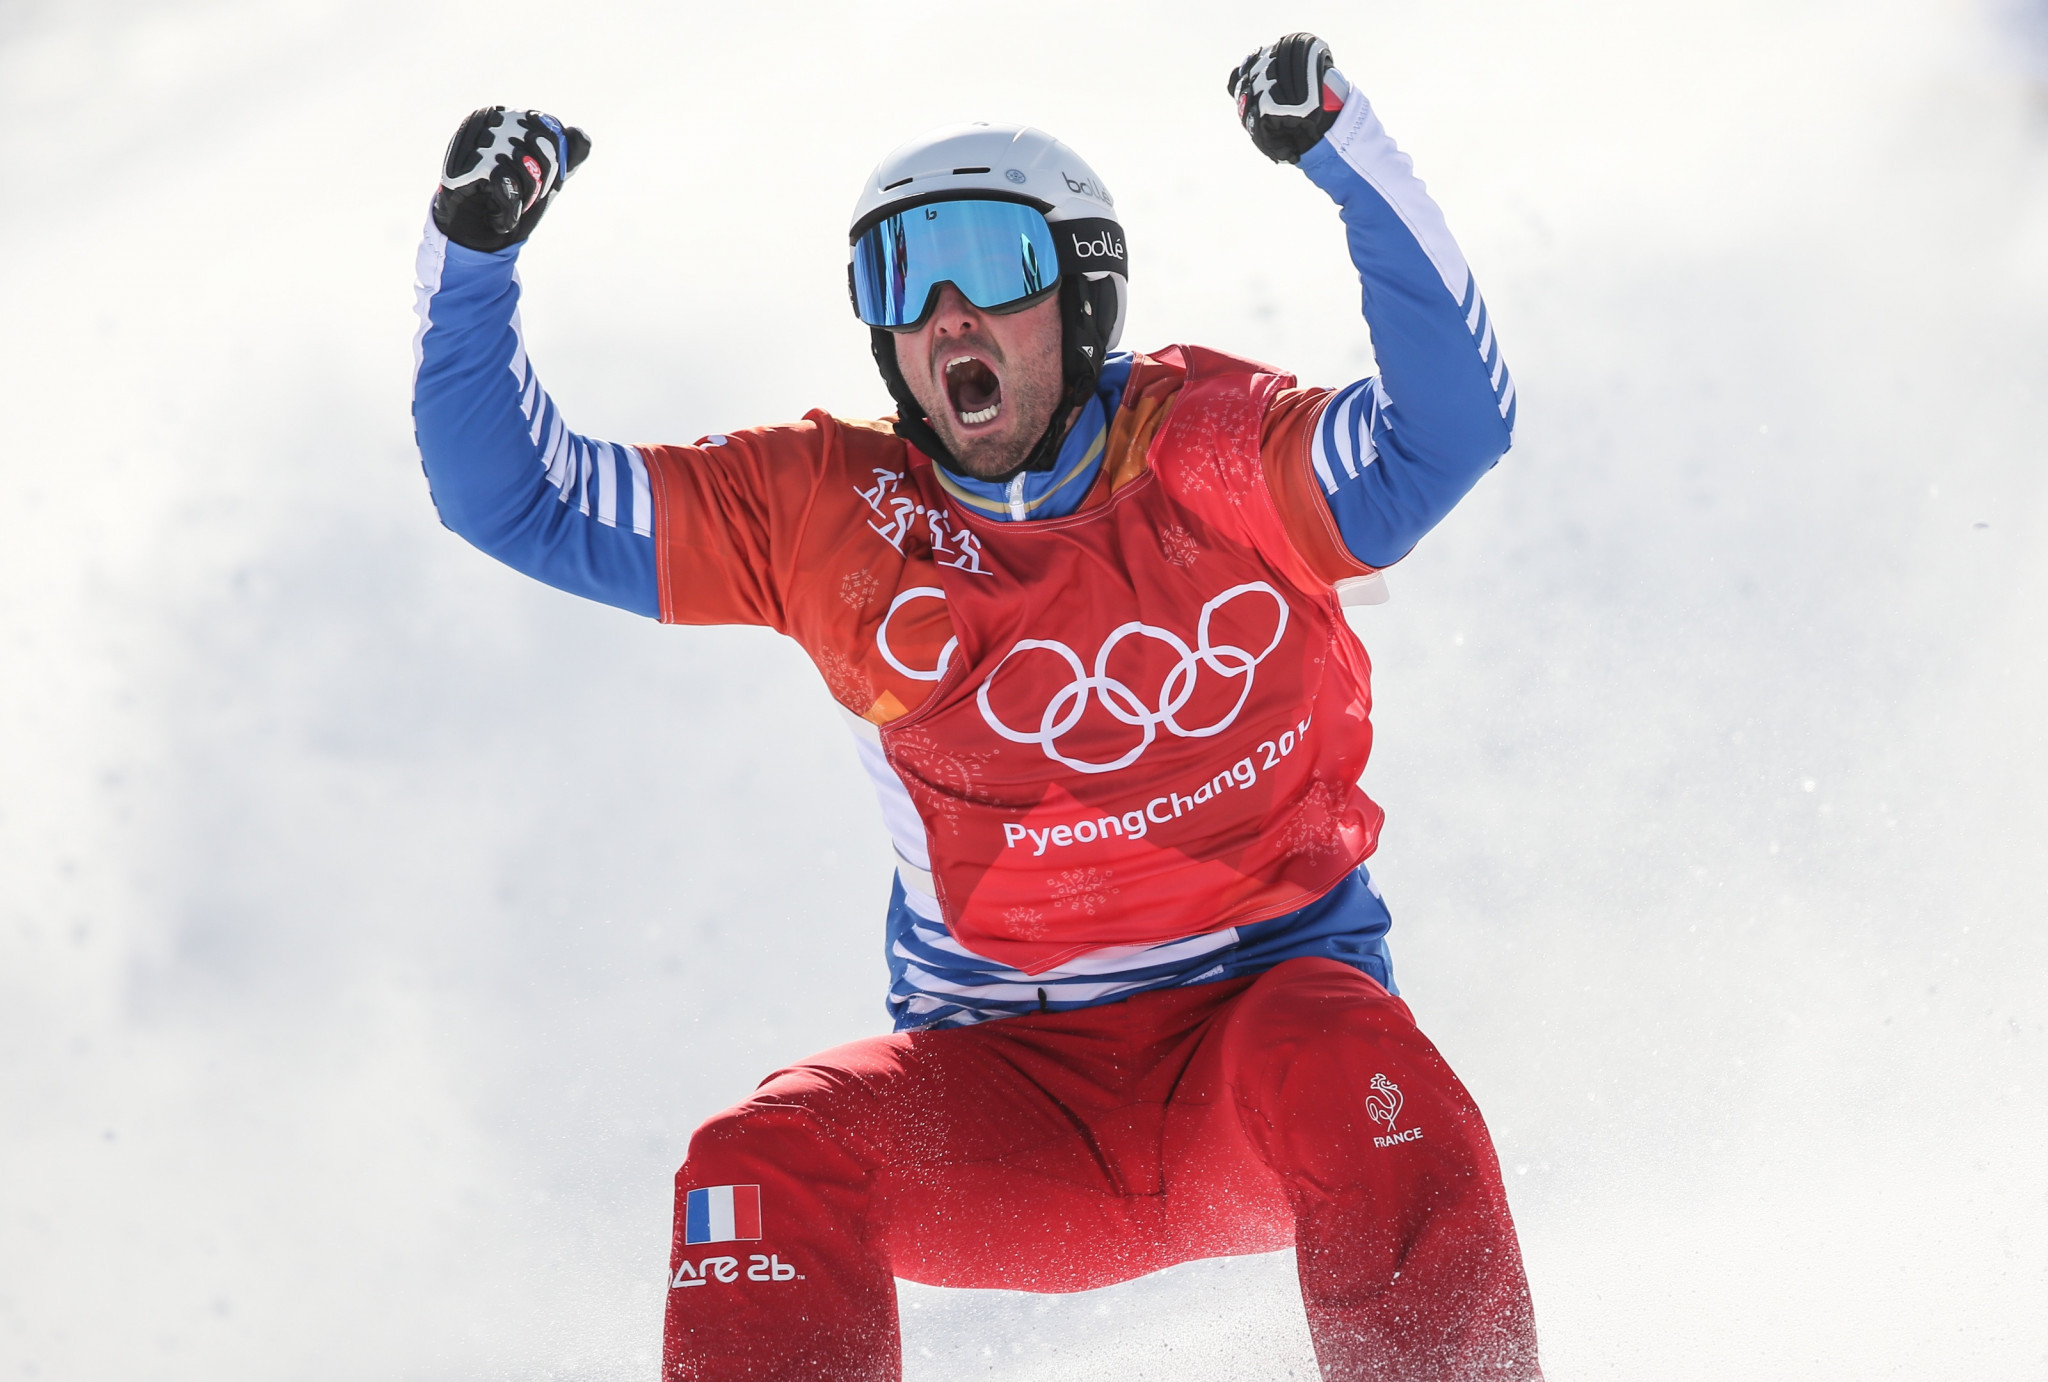 France’s Pierre Vaultier successfully defended his men’s snowboard cross Olympic title after coming out on top on a challenging day at Pyeongchang 2018 ©Getty Images